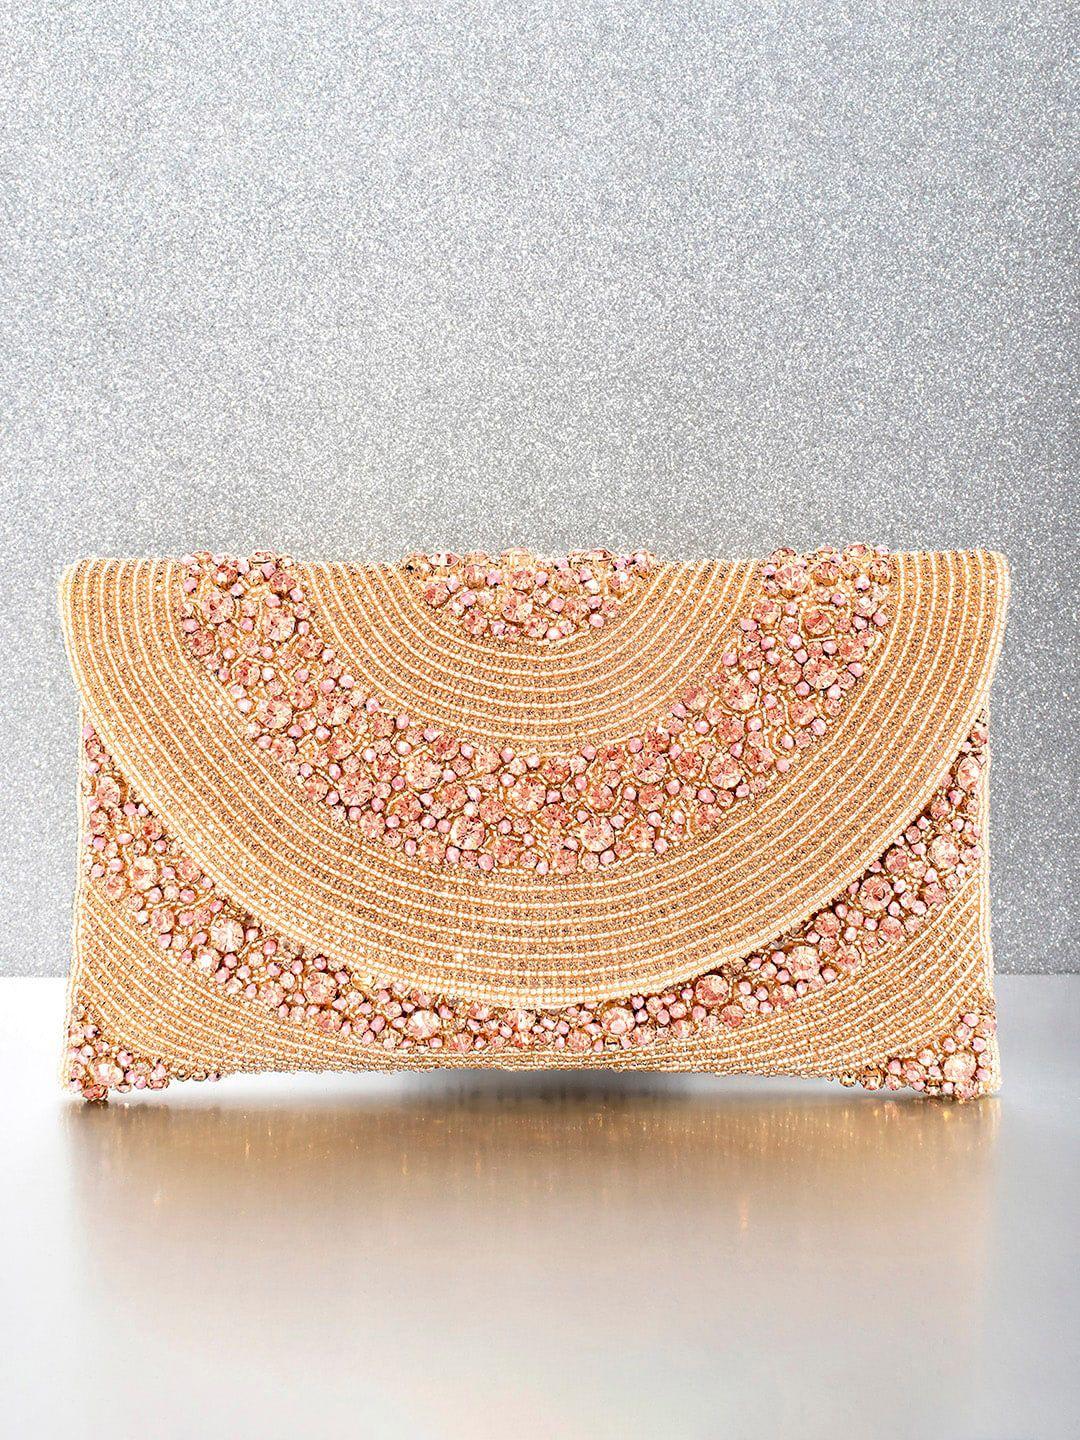 peora women rose gold clutches